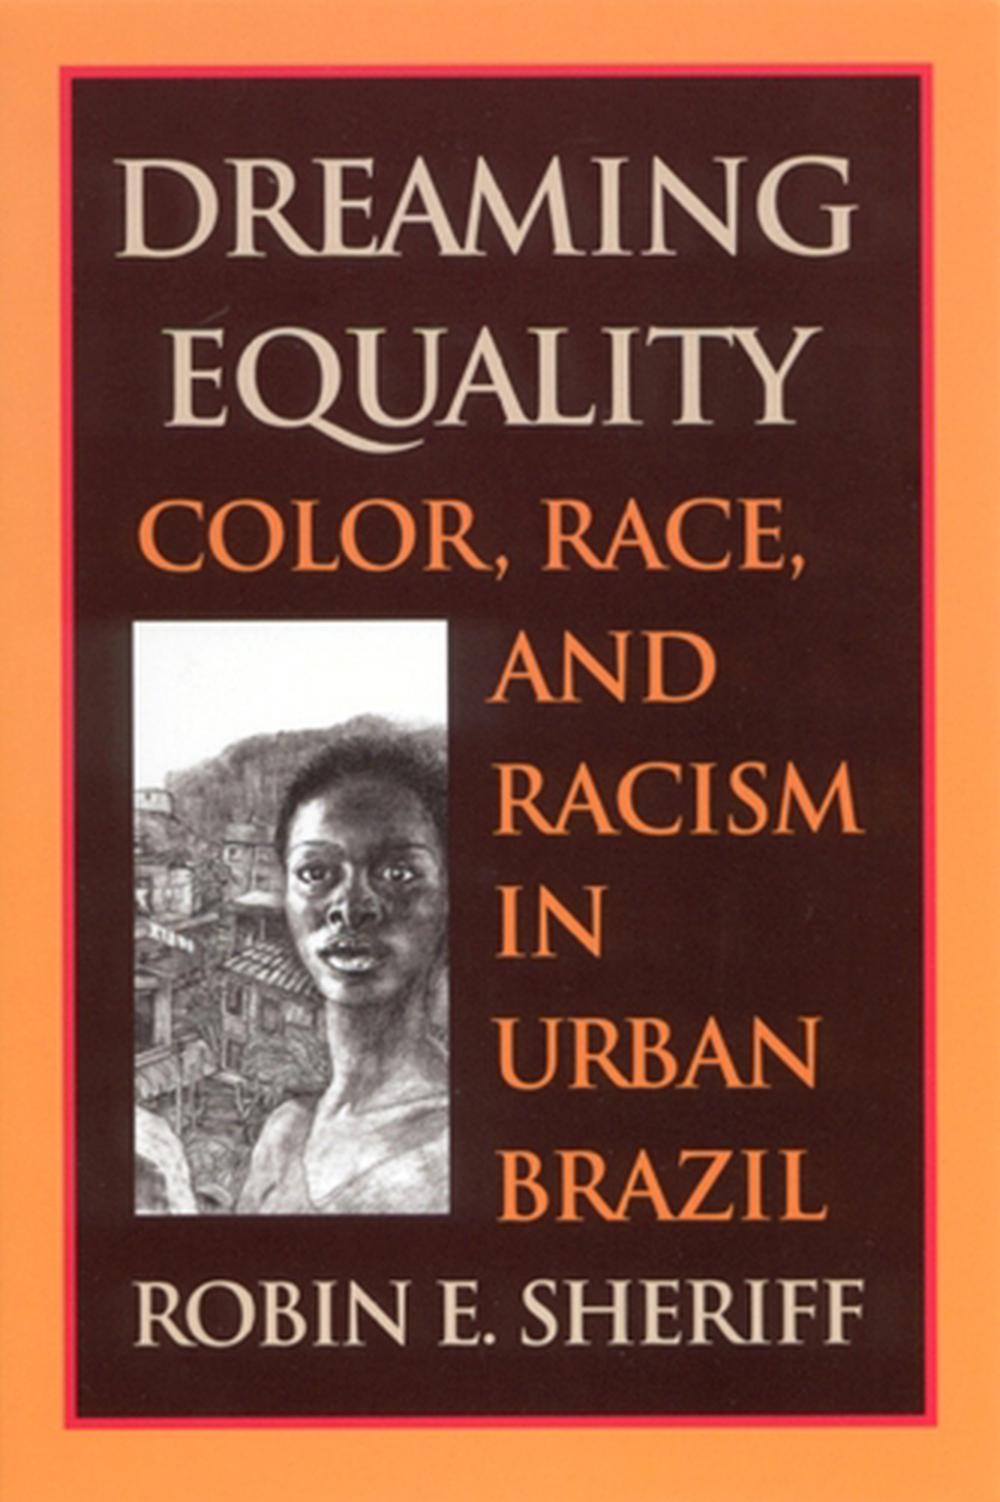 Dreaming Equality Color, Race, and Racism in Urban Brazil by Robin E